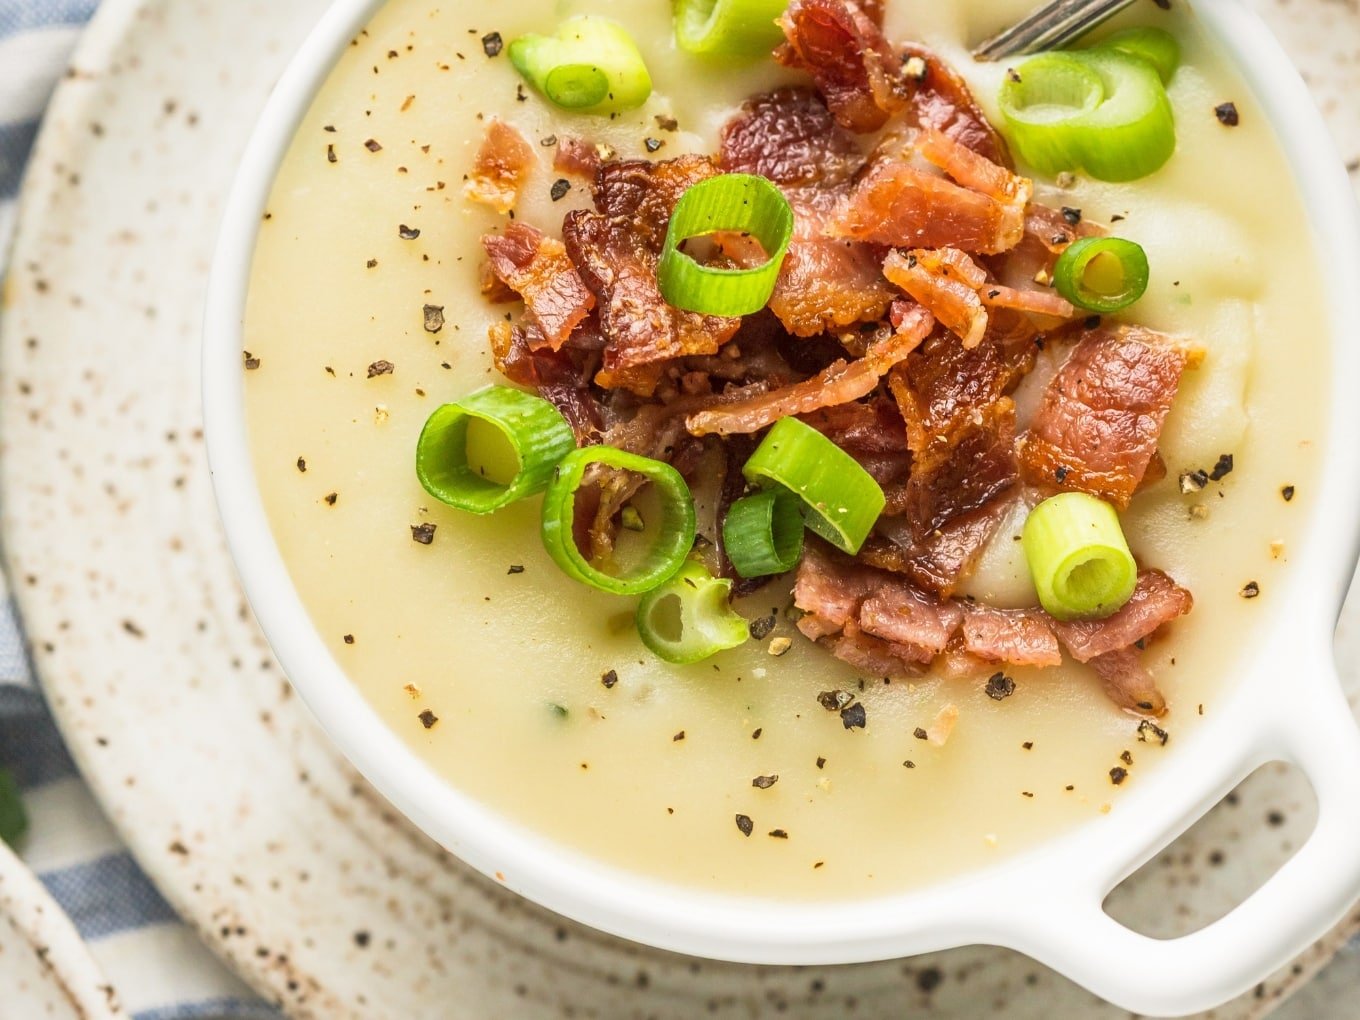 51 Delicious Soup Recipes Ready in 30 Minutes